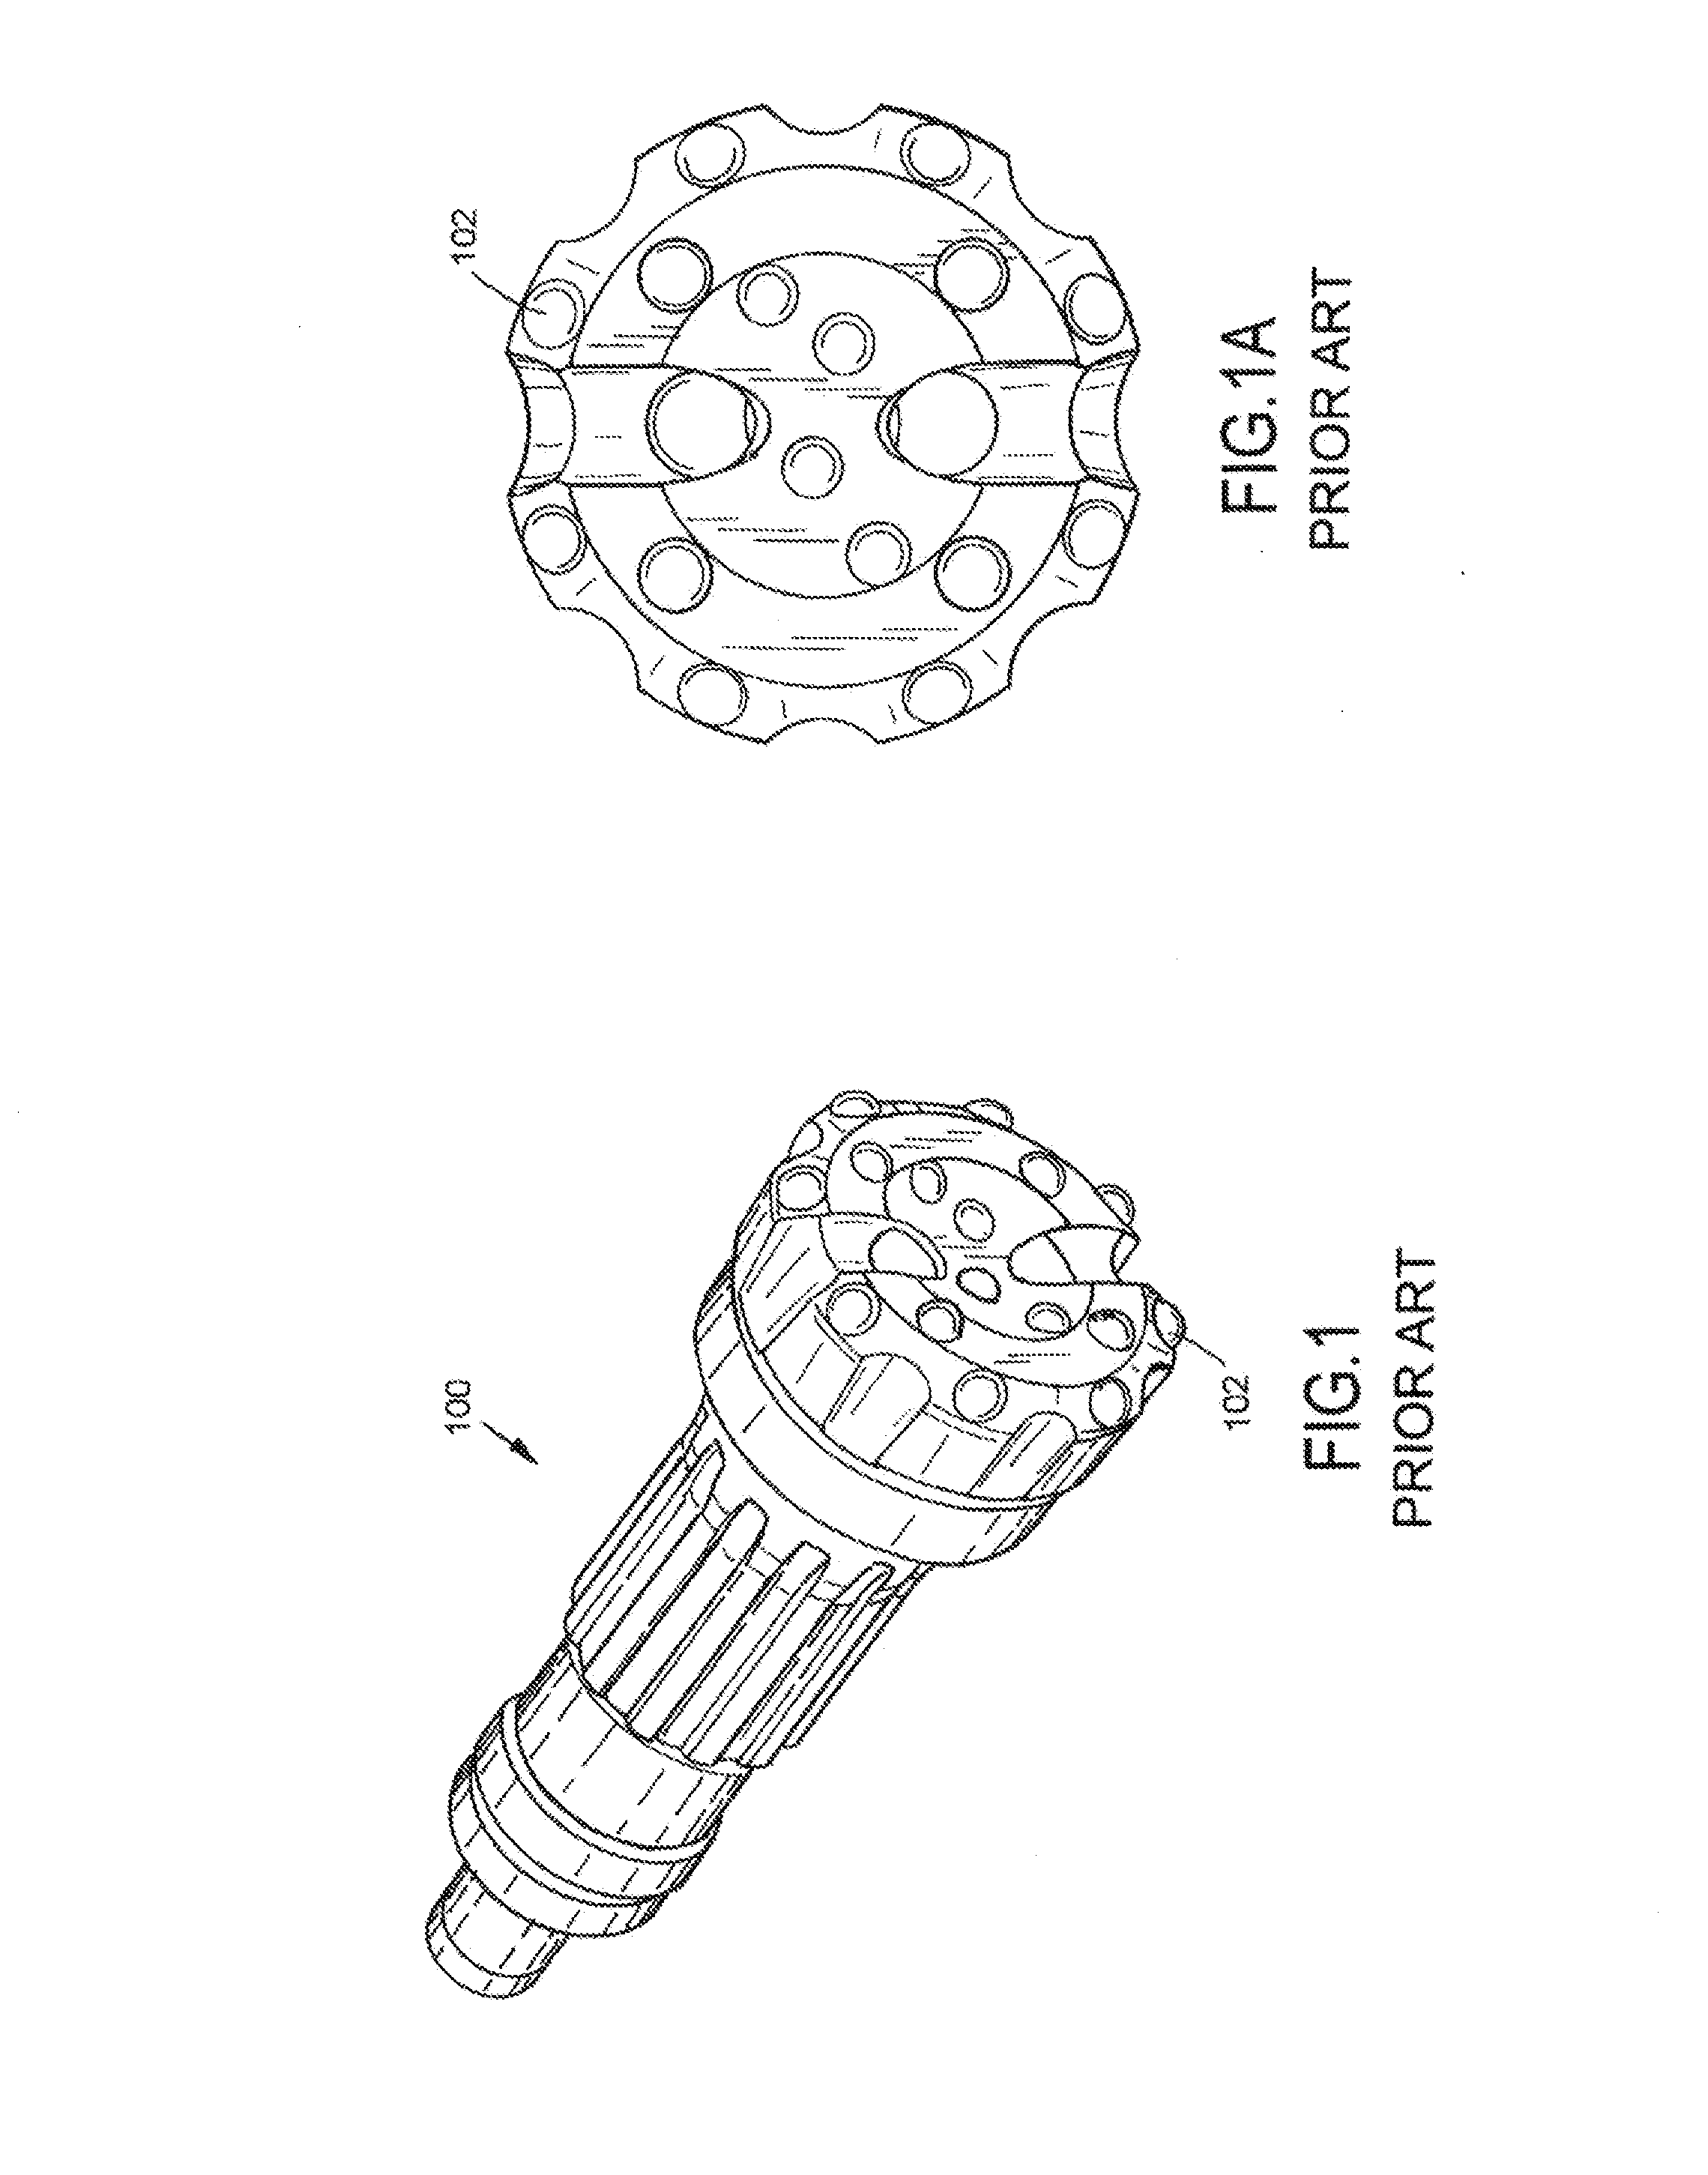 Non-rotating drill bit for a down-the-hole drill hammer